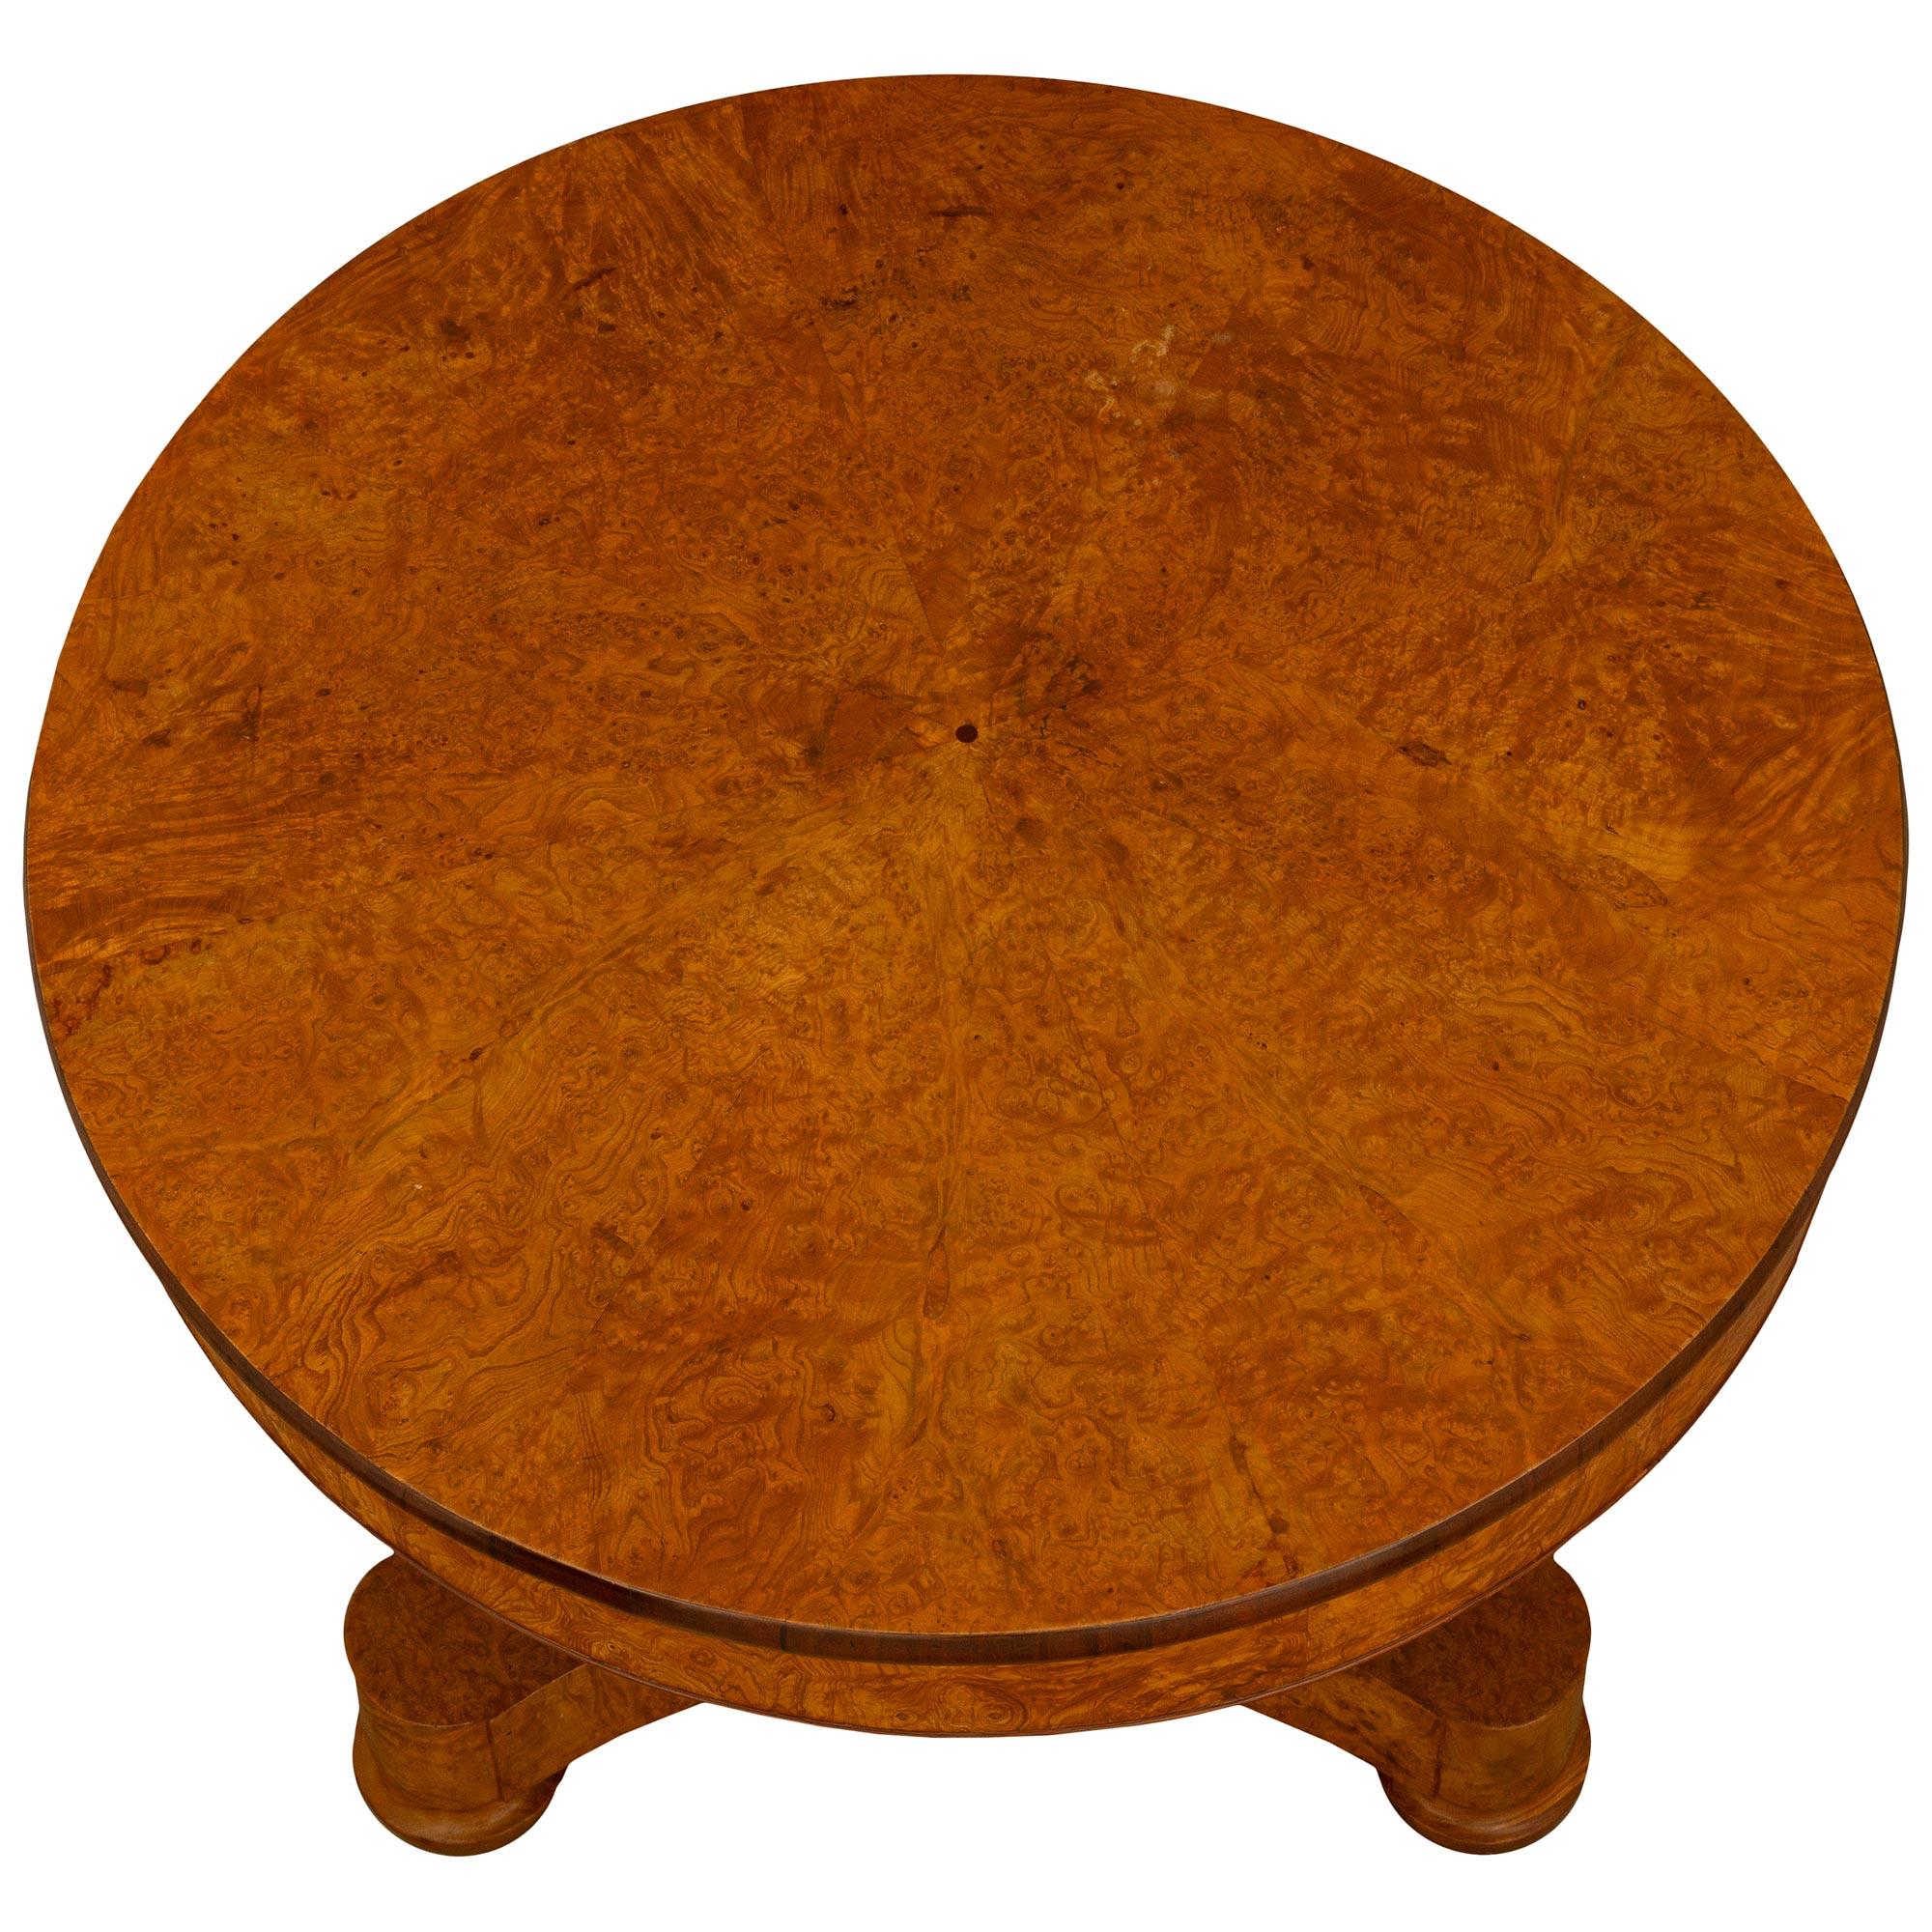 A very attractive French 19th century Charles X st. burl Walnut center table. The table is raised on bun feet below the handsome triangular base with concave sides. Above is the elegant central tapering triangular support below the circular top. At